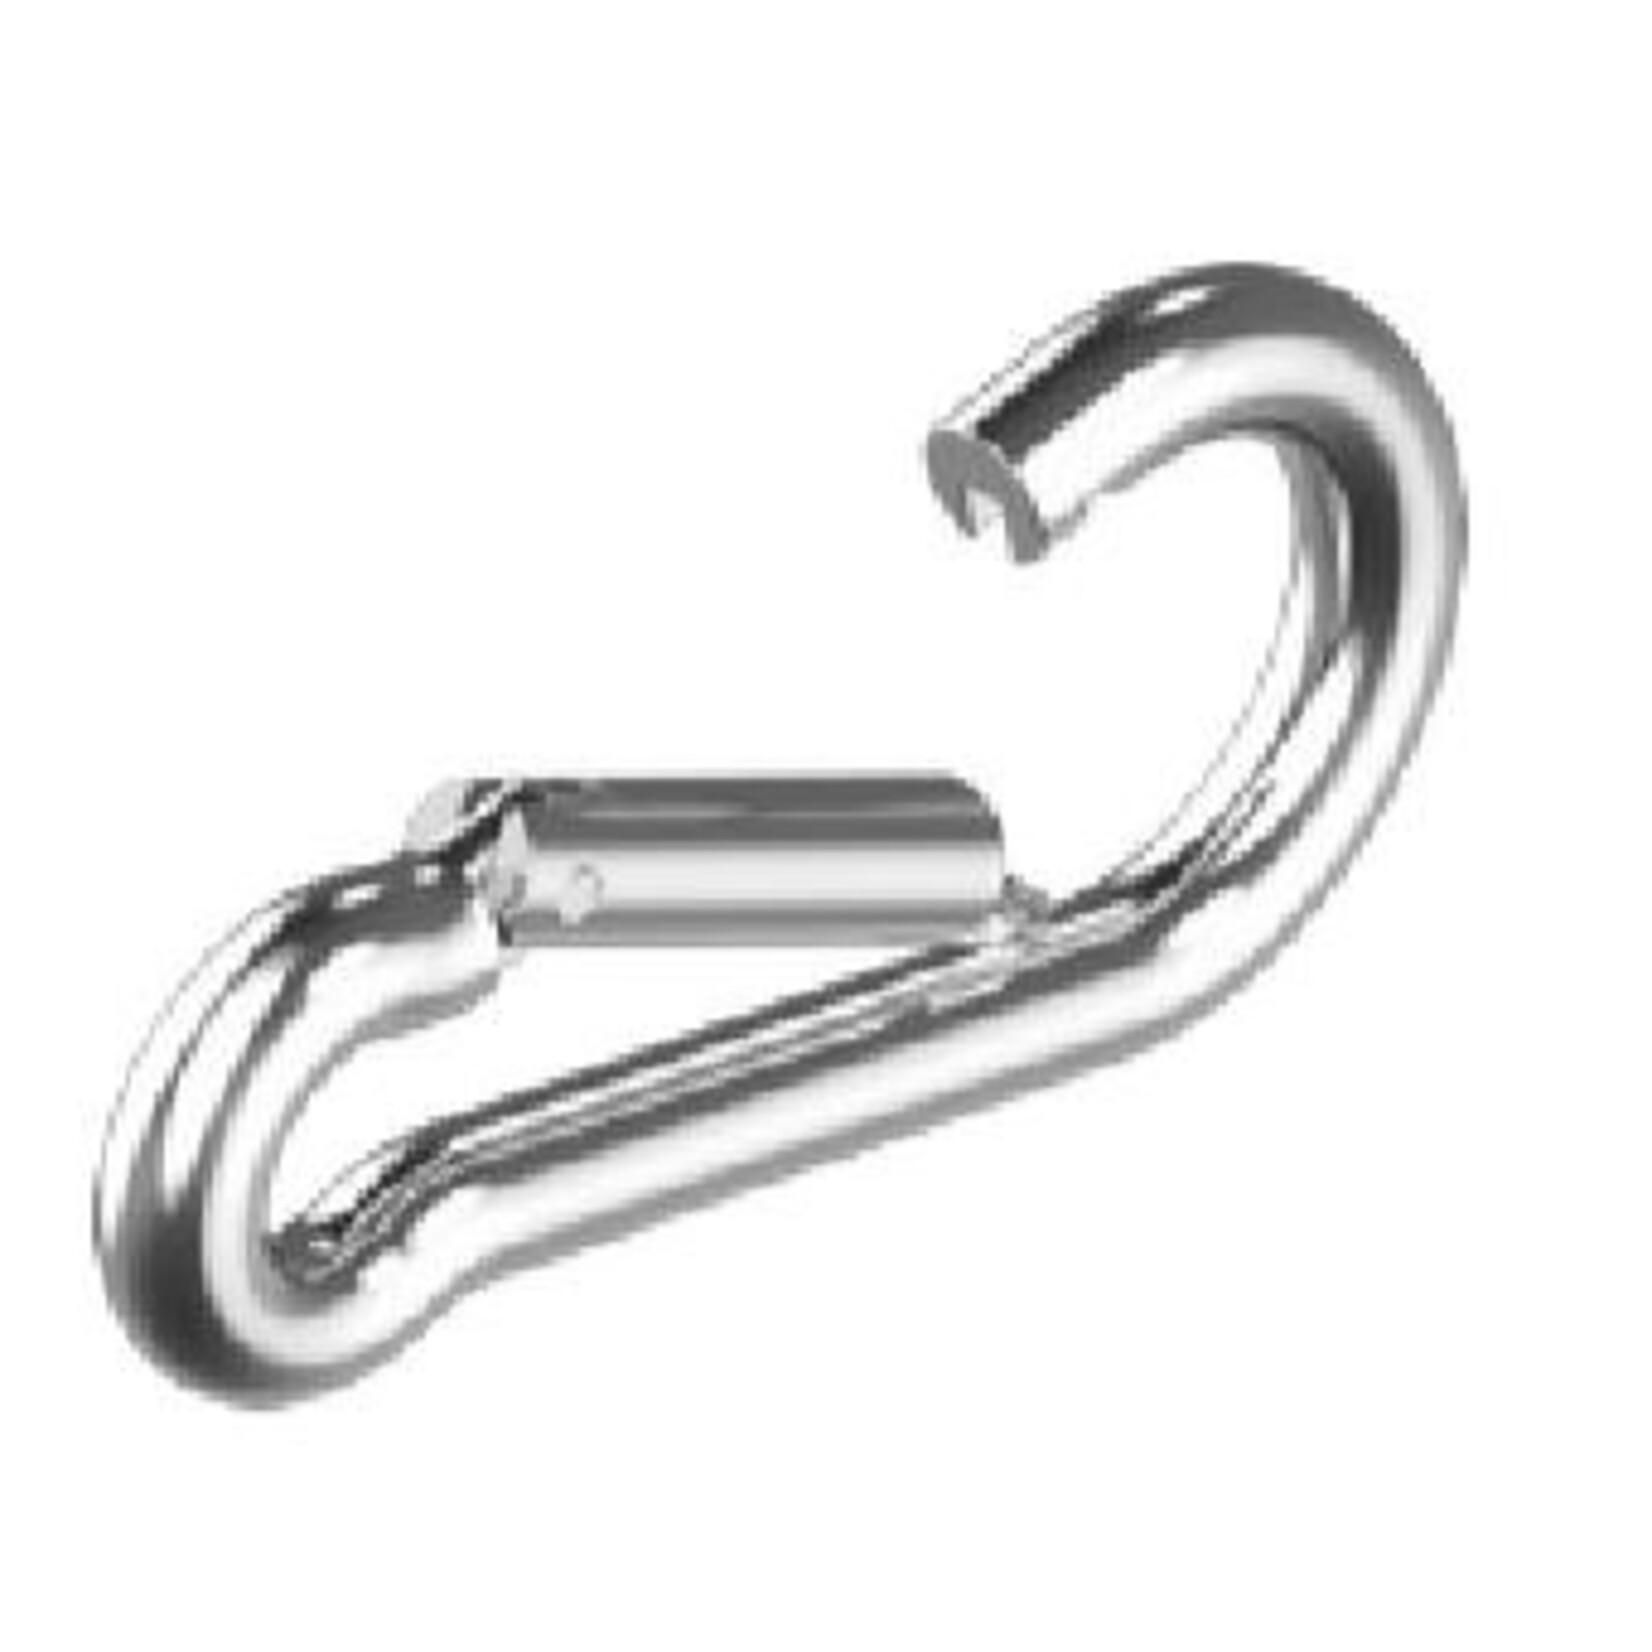 Snap hook stainless 10x100mm 10 pcs